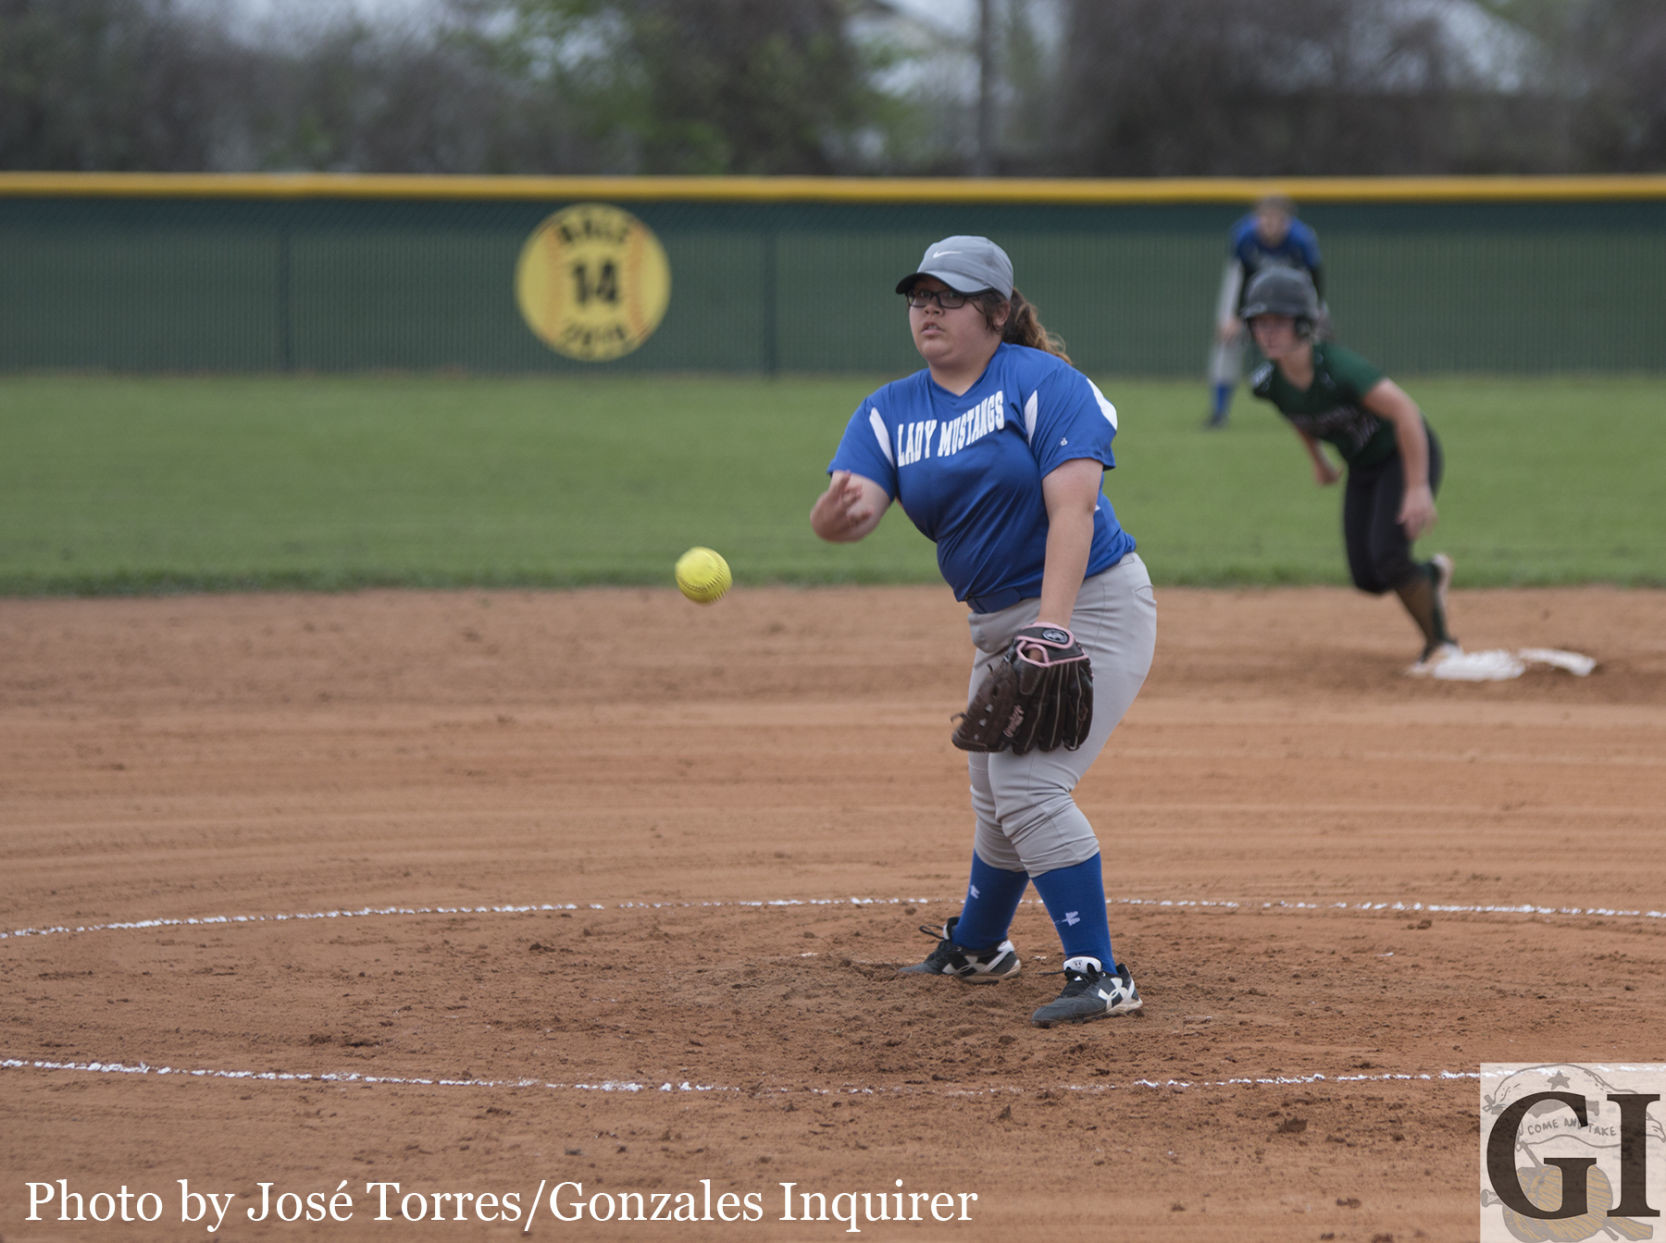 Tatiana Castillo pitched all three innings in the Lady Mustangs’ 15-0 loss on Friday.